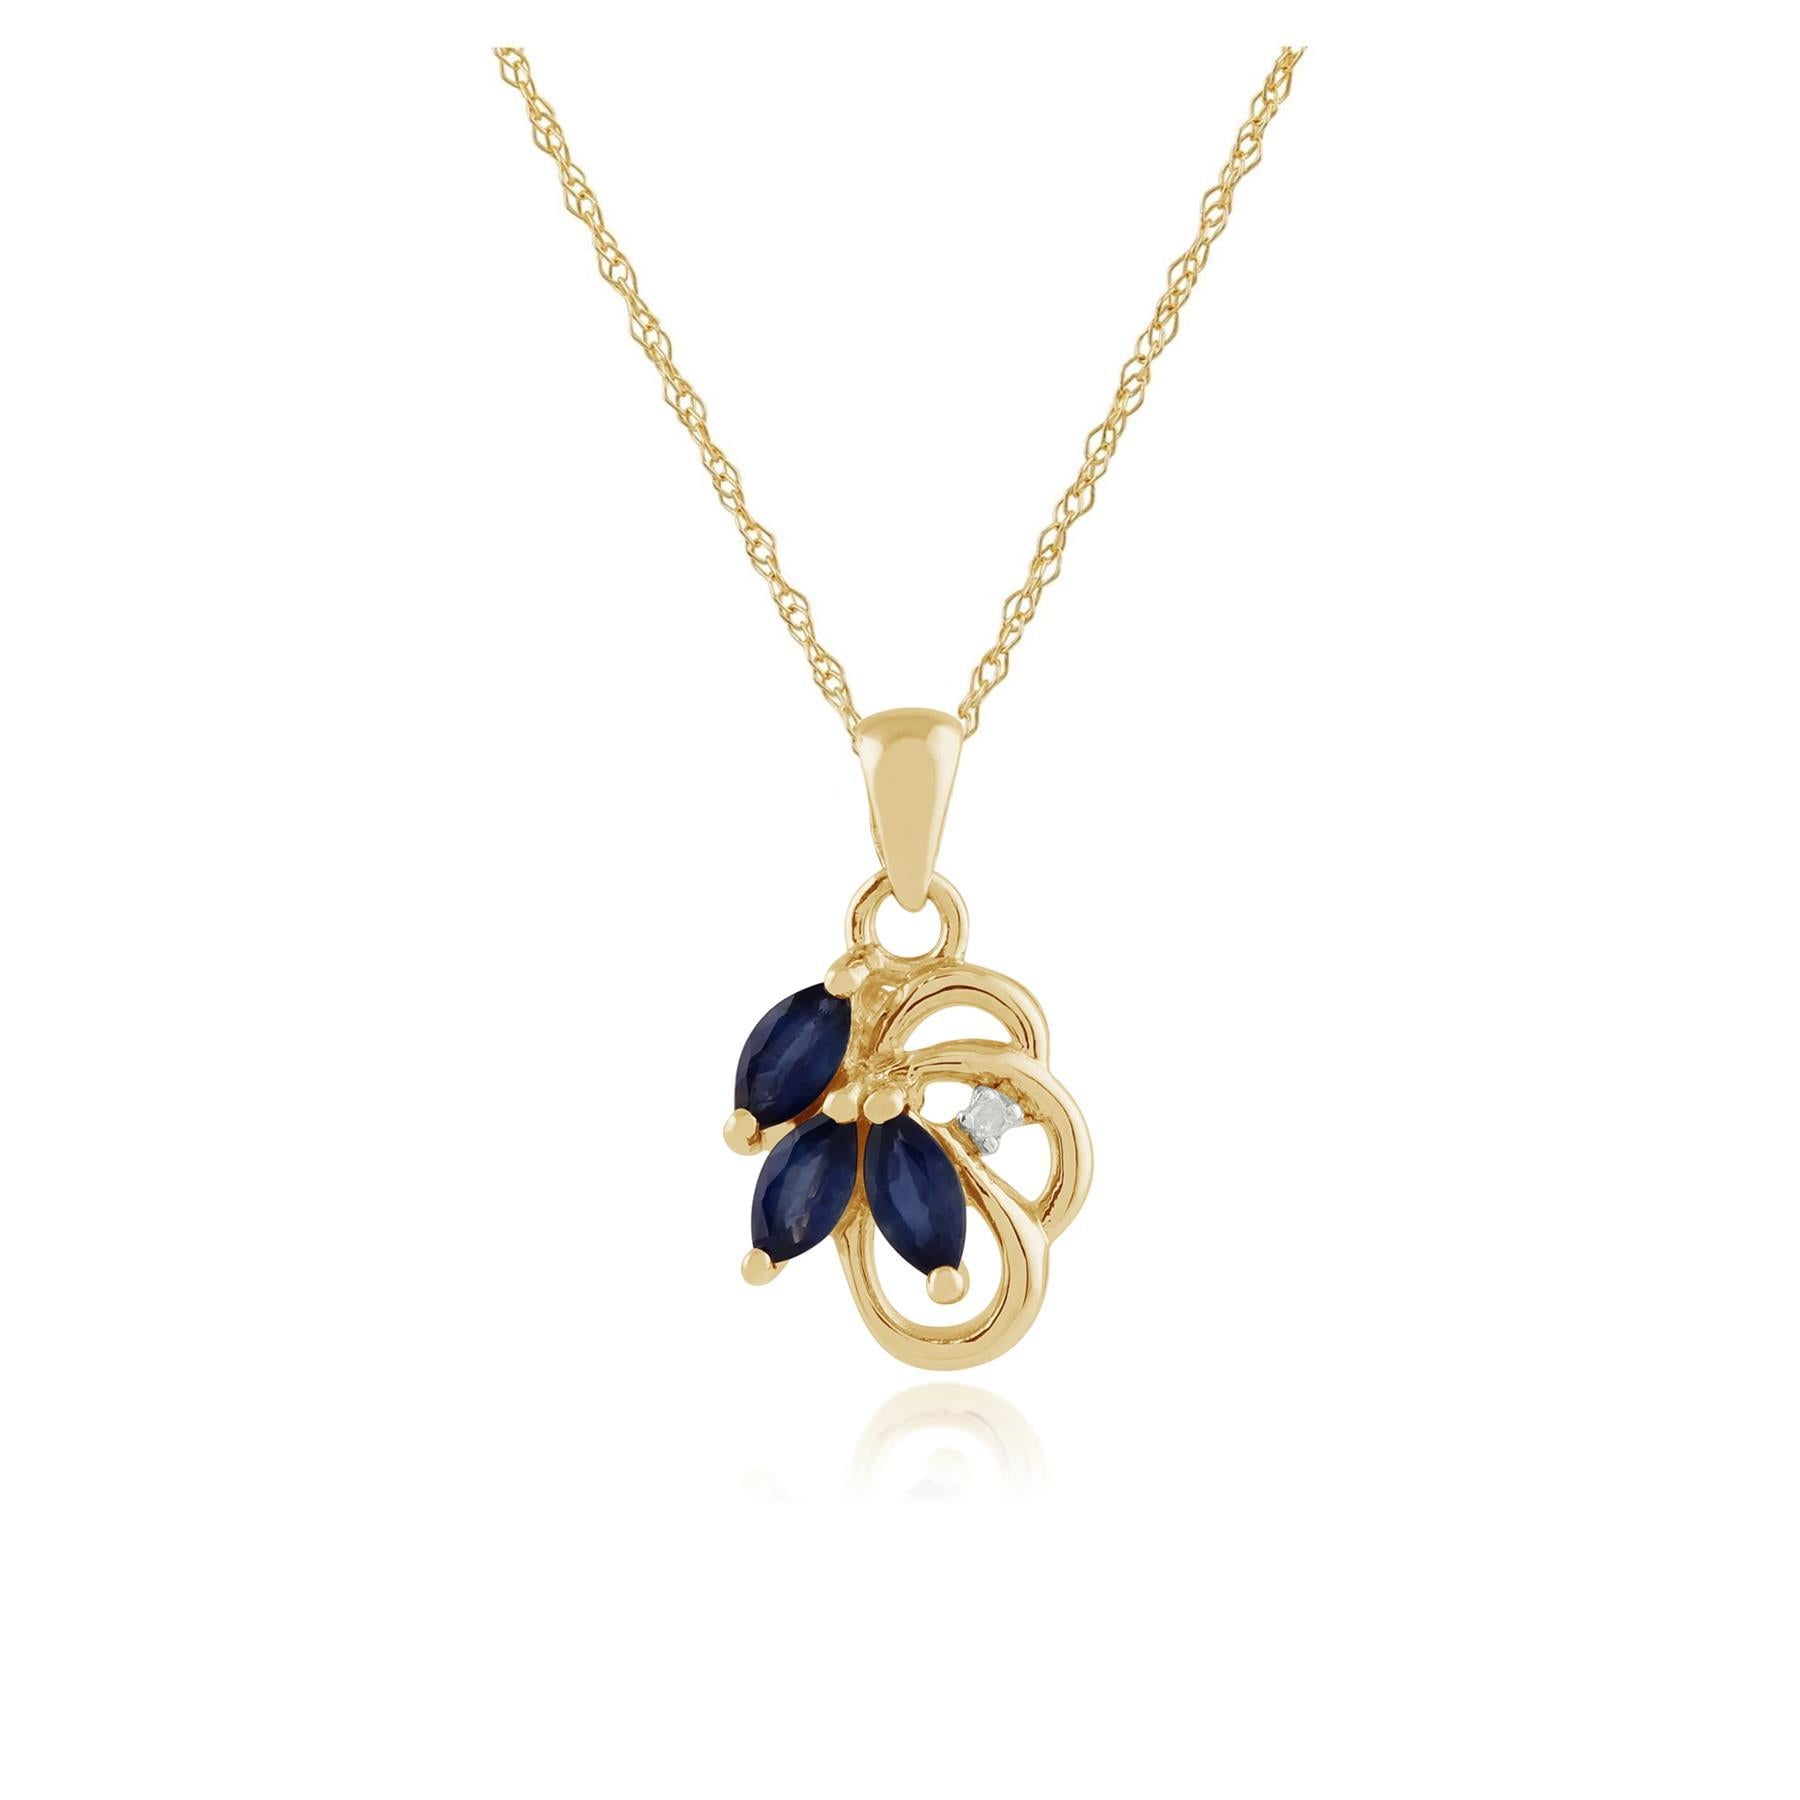 Sapphire and diamond floral pendant necklace in 9ct yellow gold